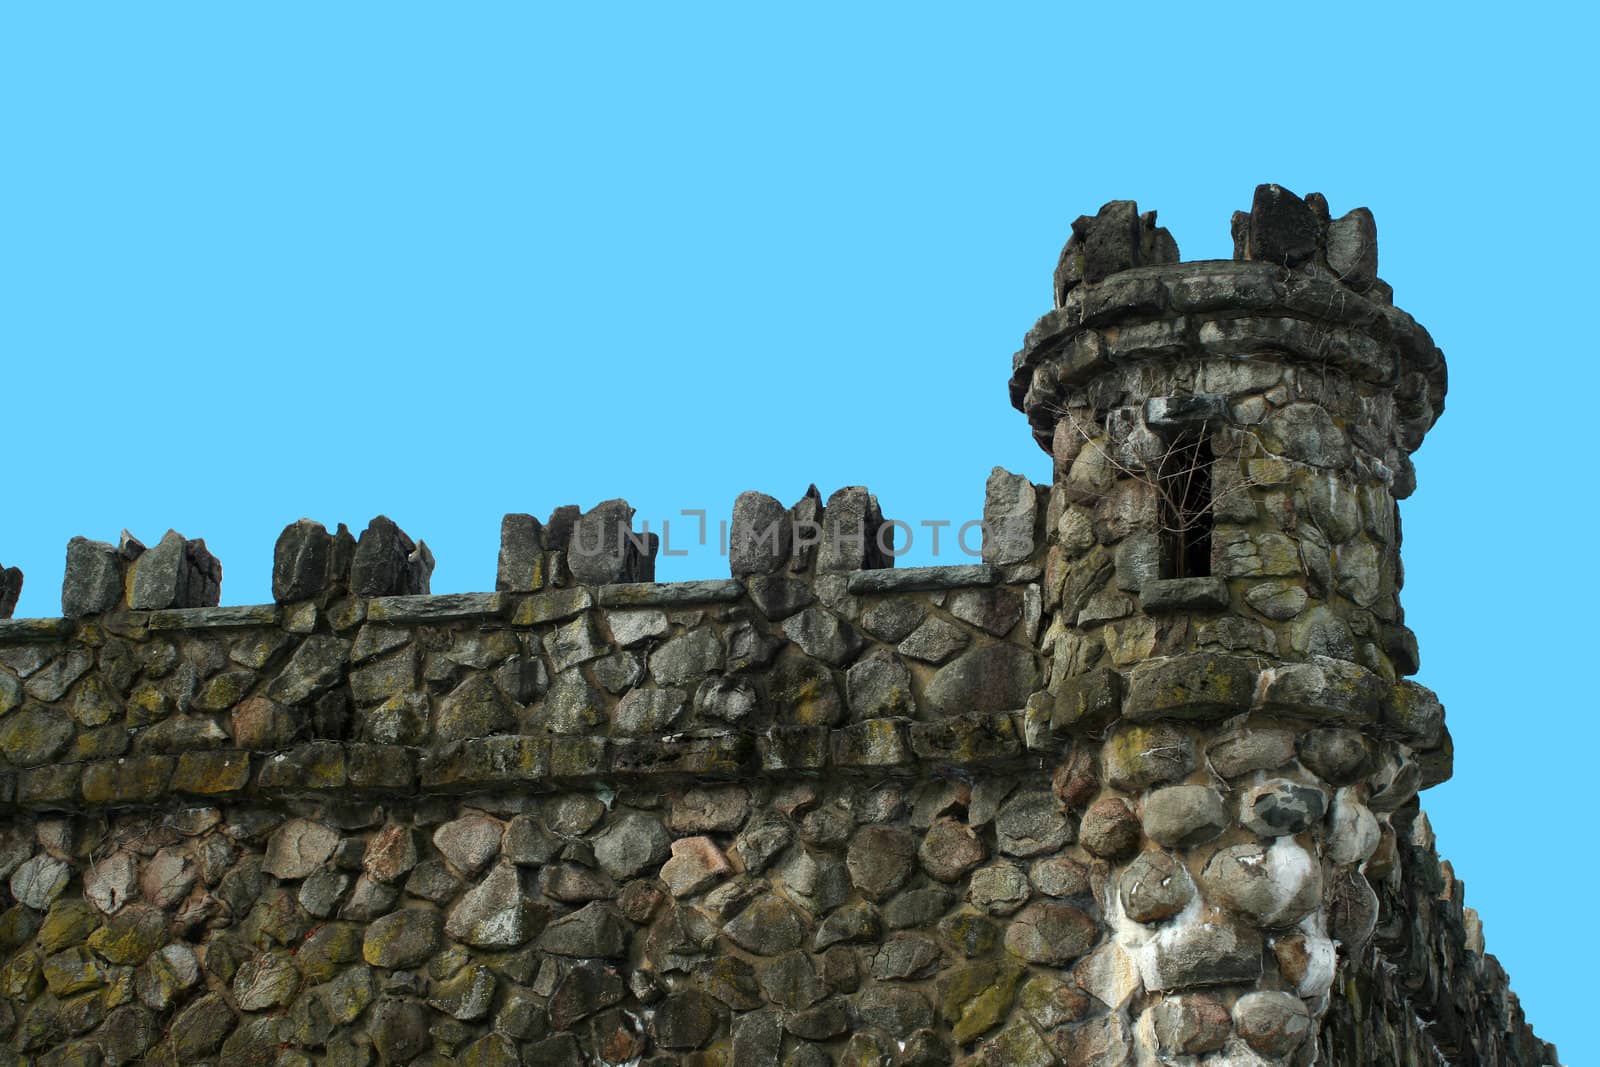 A Old stone castle